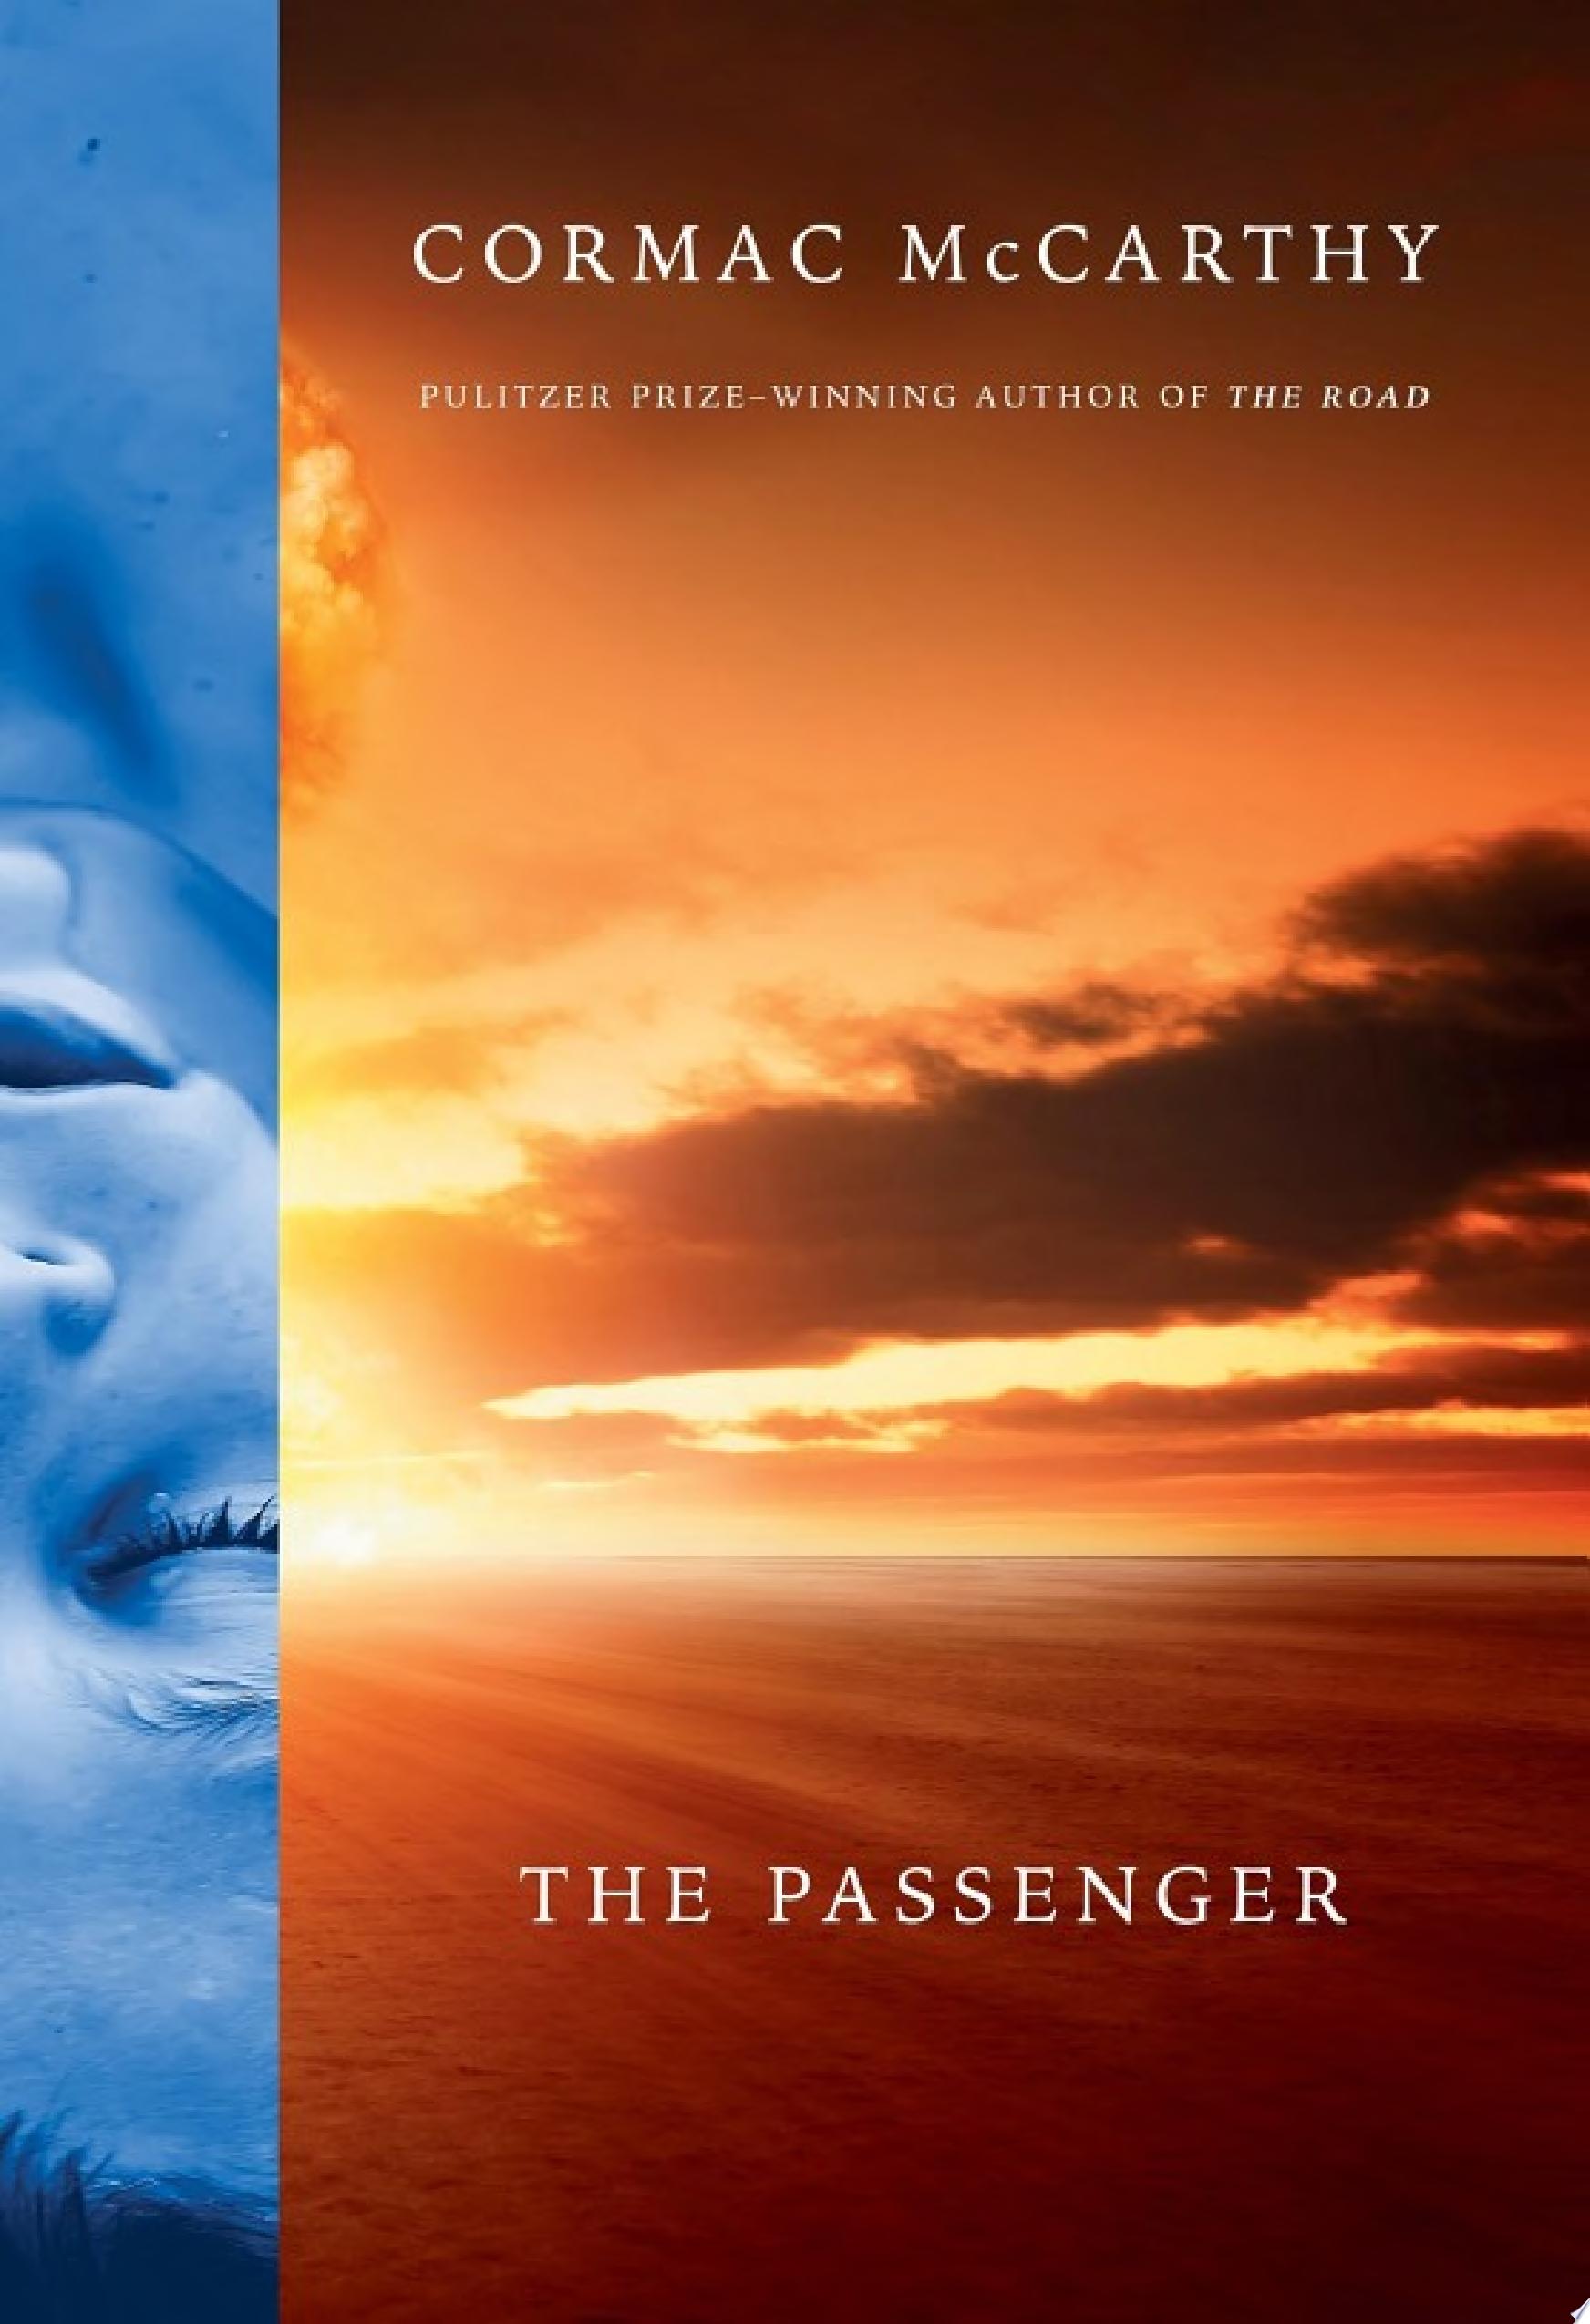 Image for "The Passenger"